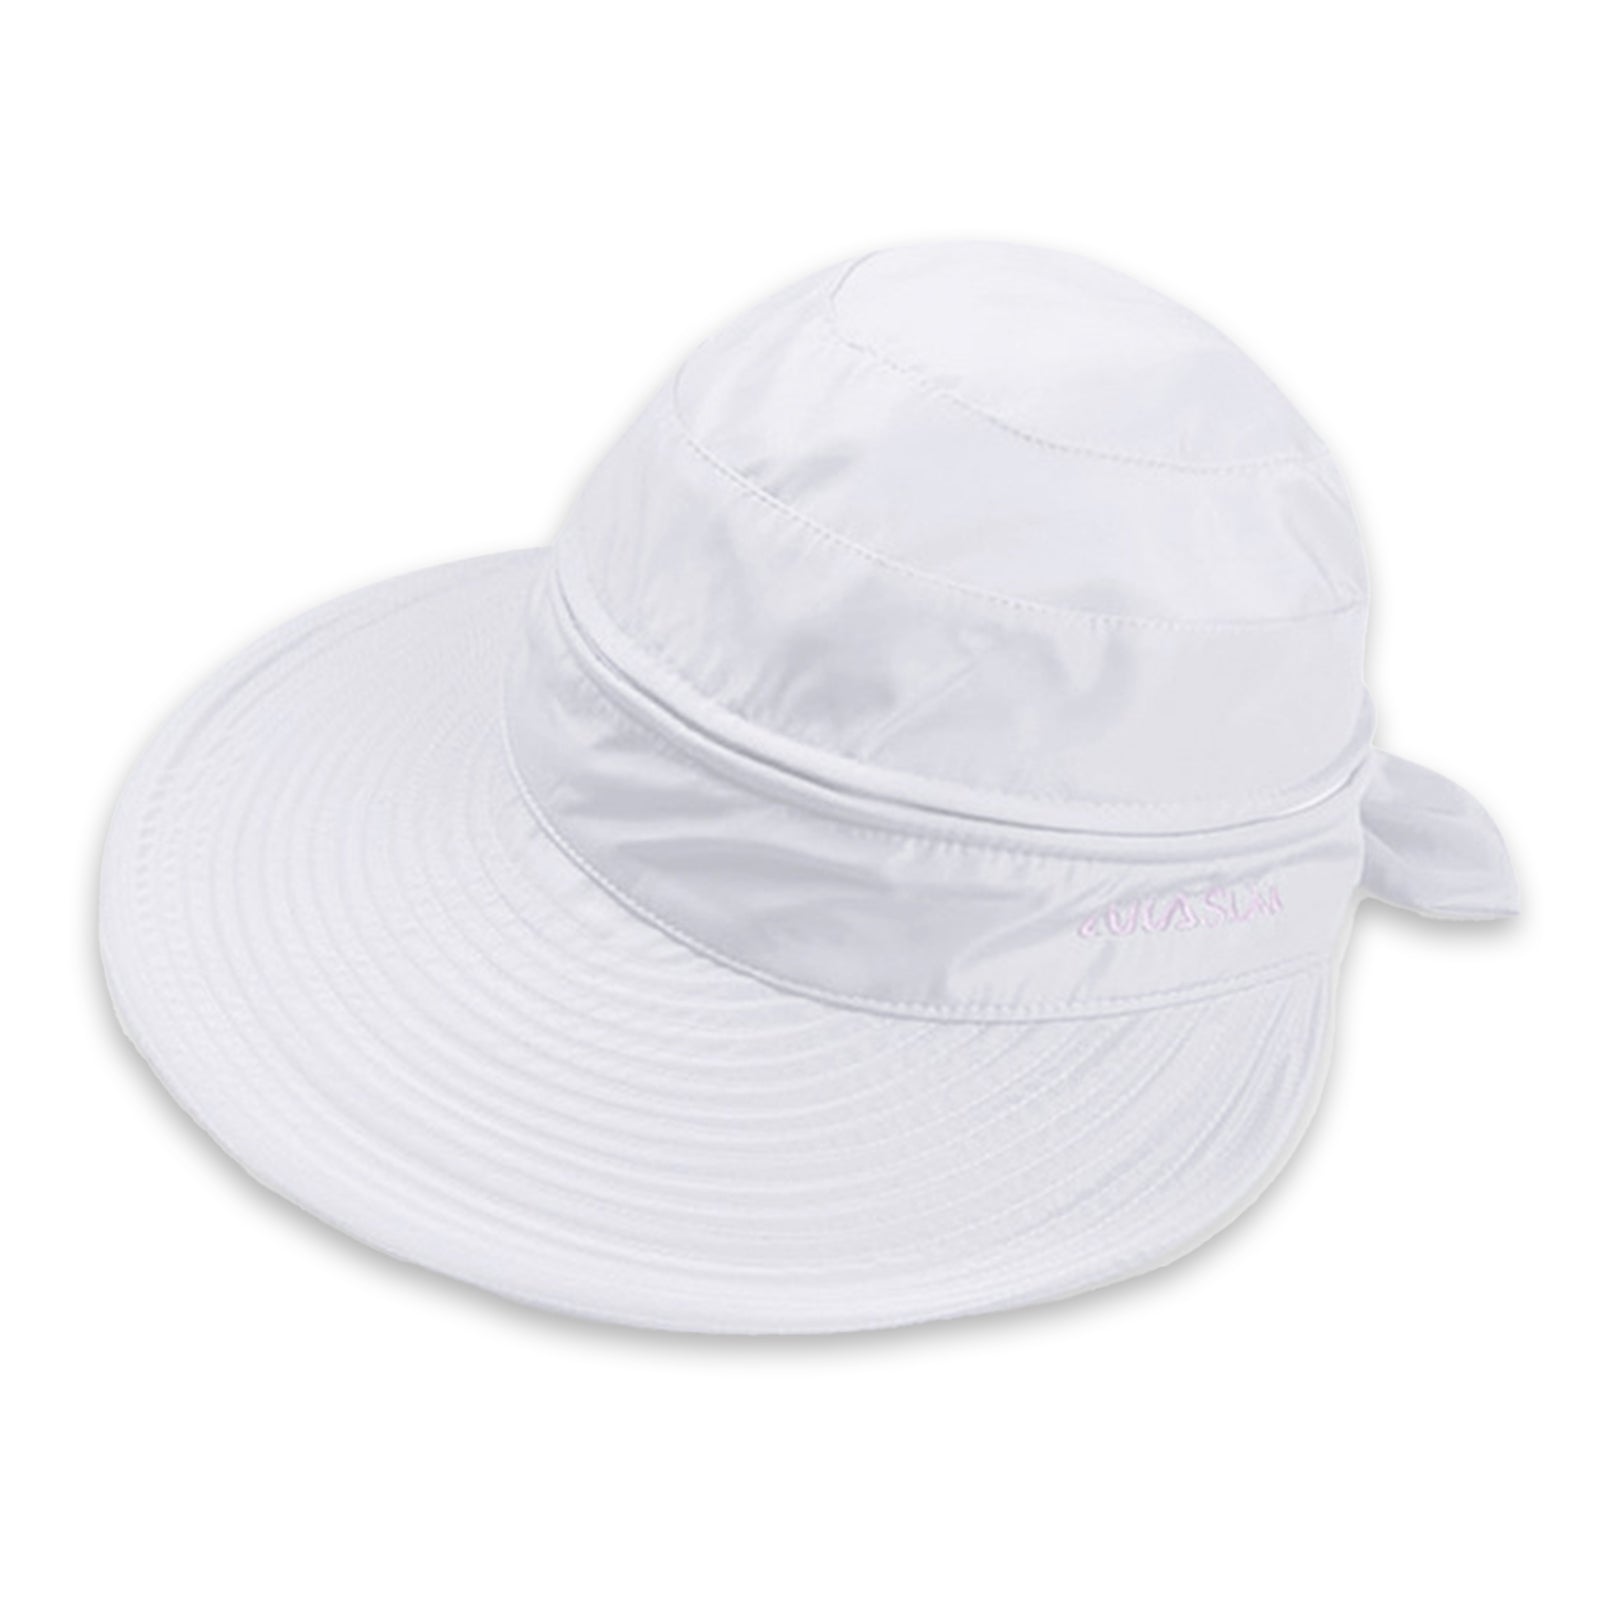 Travel in Style with this 2-in-1 Sun Visor Hat